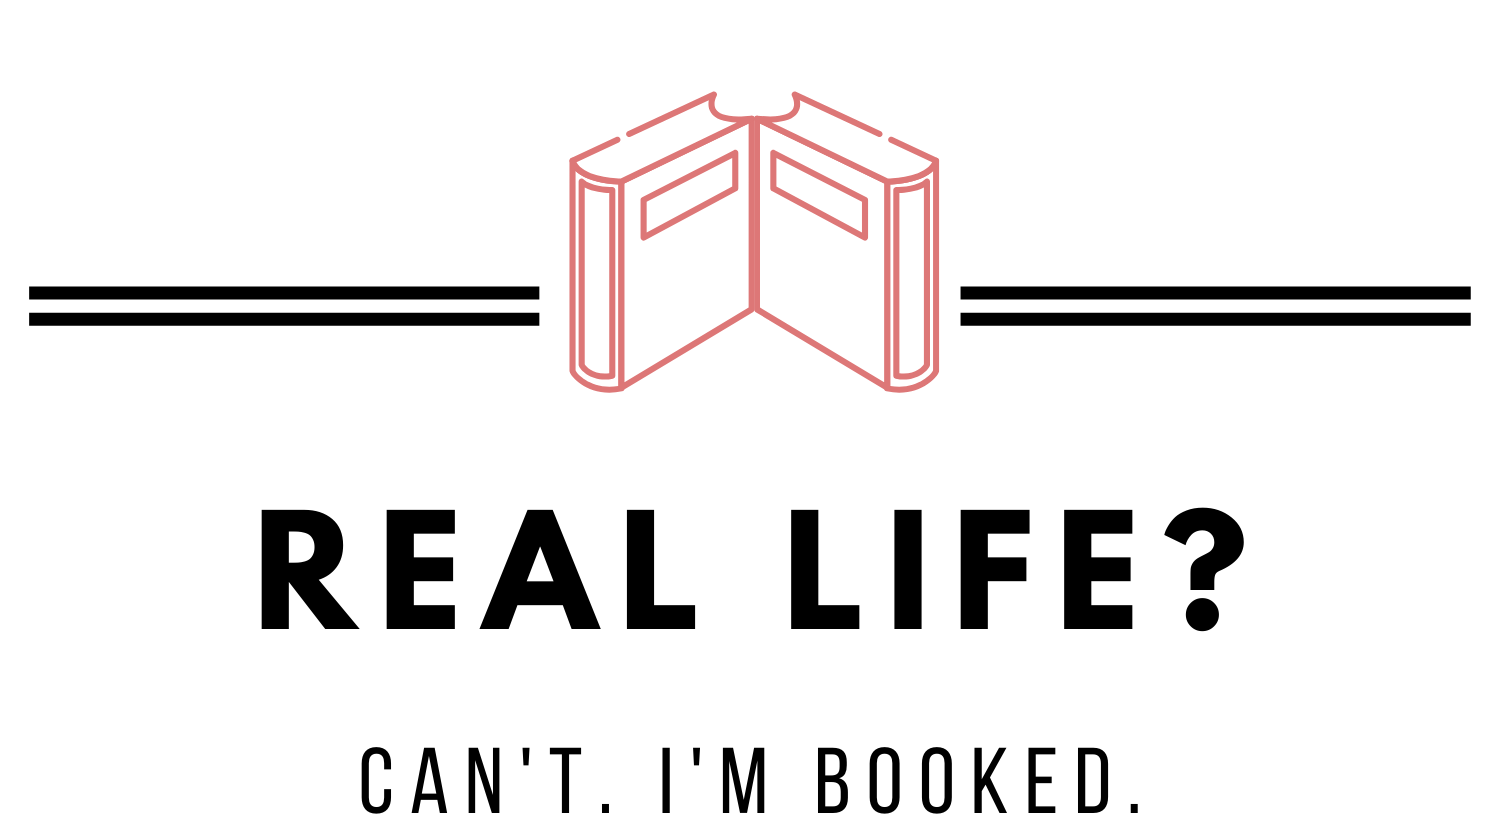 Real Life? Can't. I'm Booked.